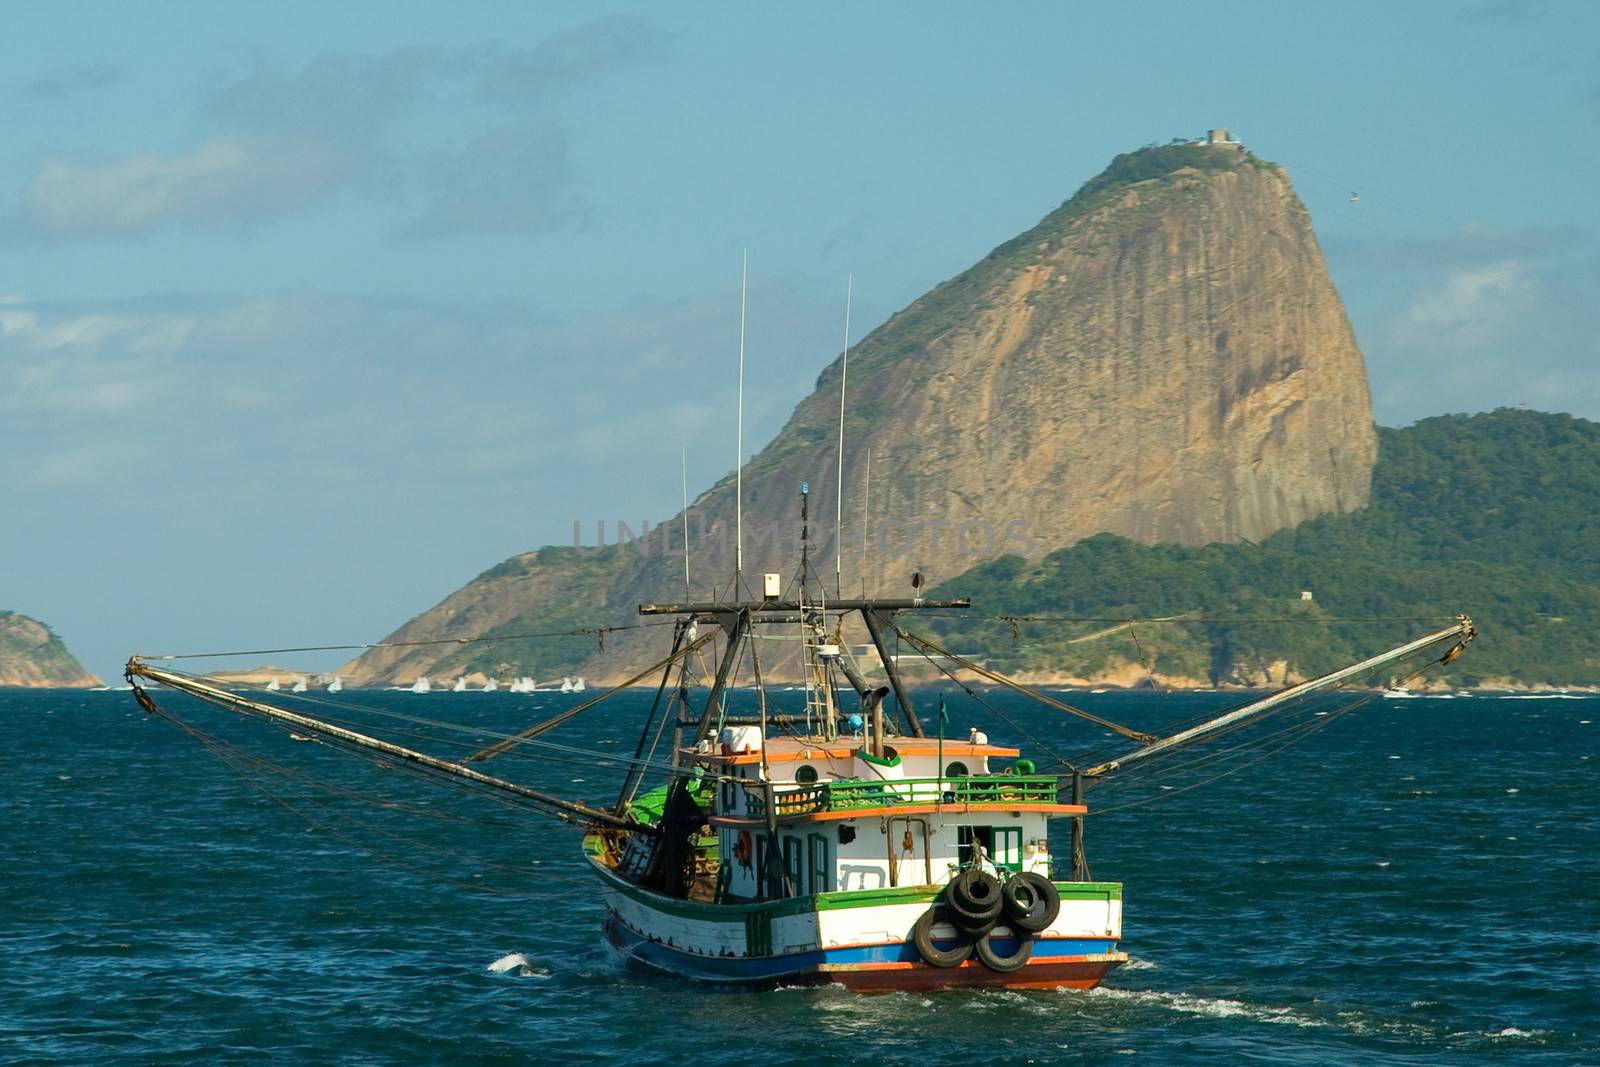 Boat in front of Sugarloaf Mountain in Rio De Janeiro, Brazil